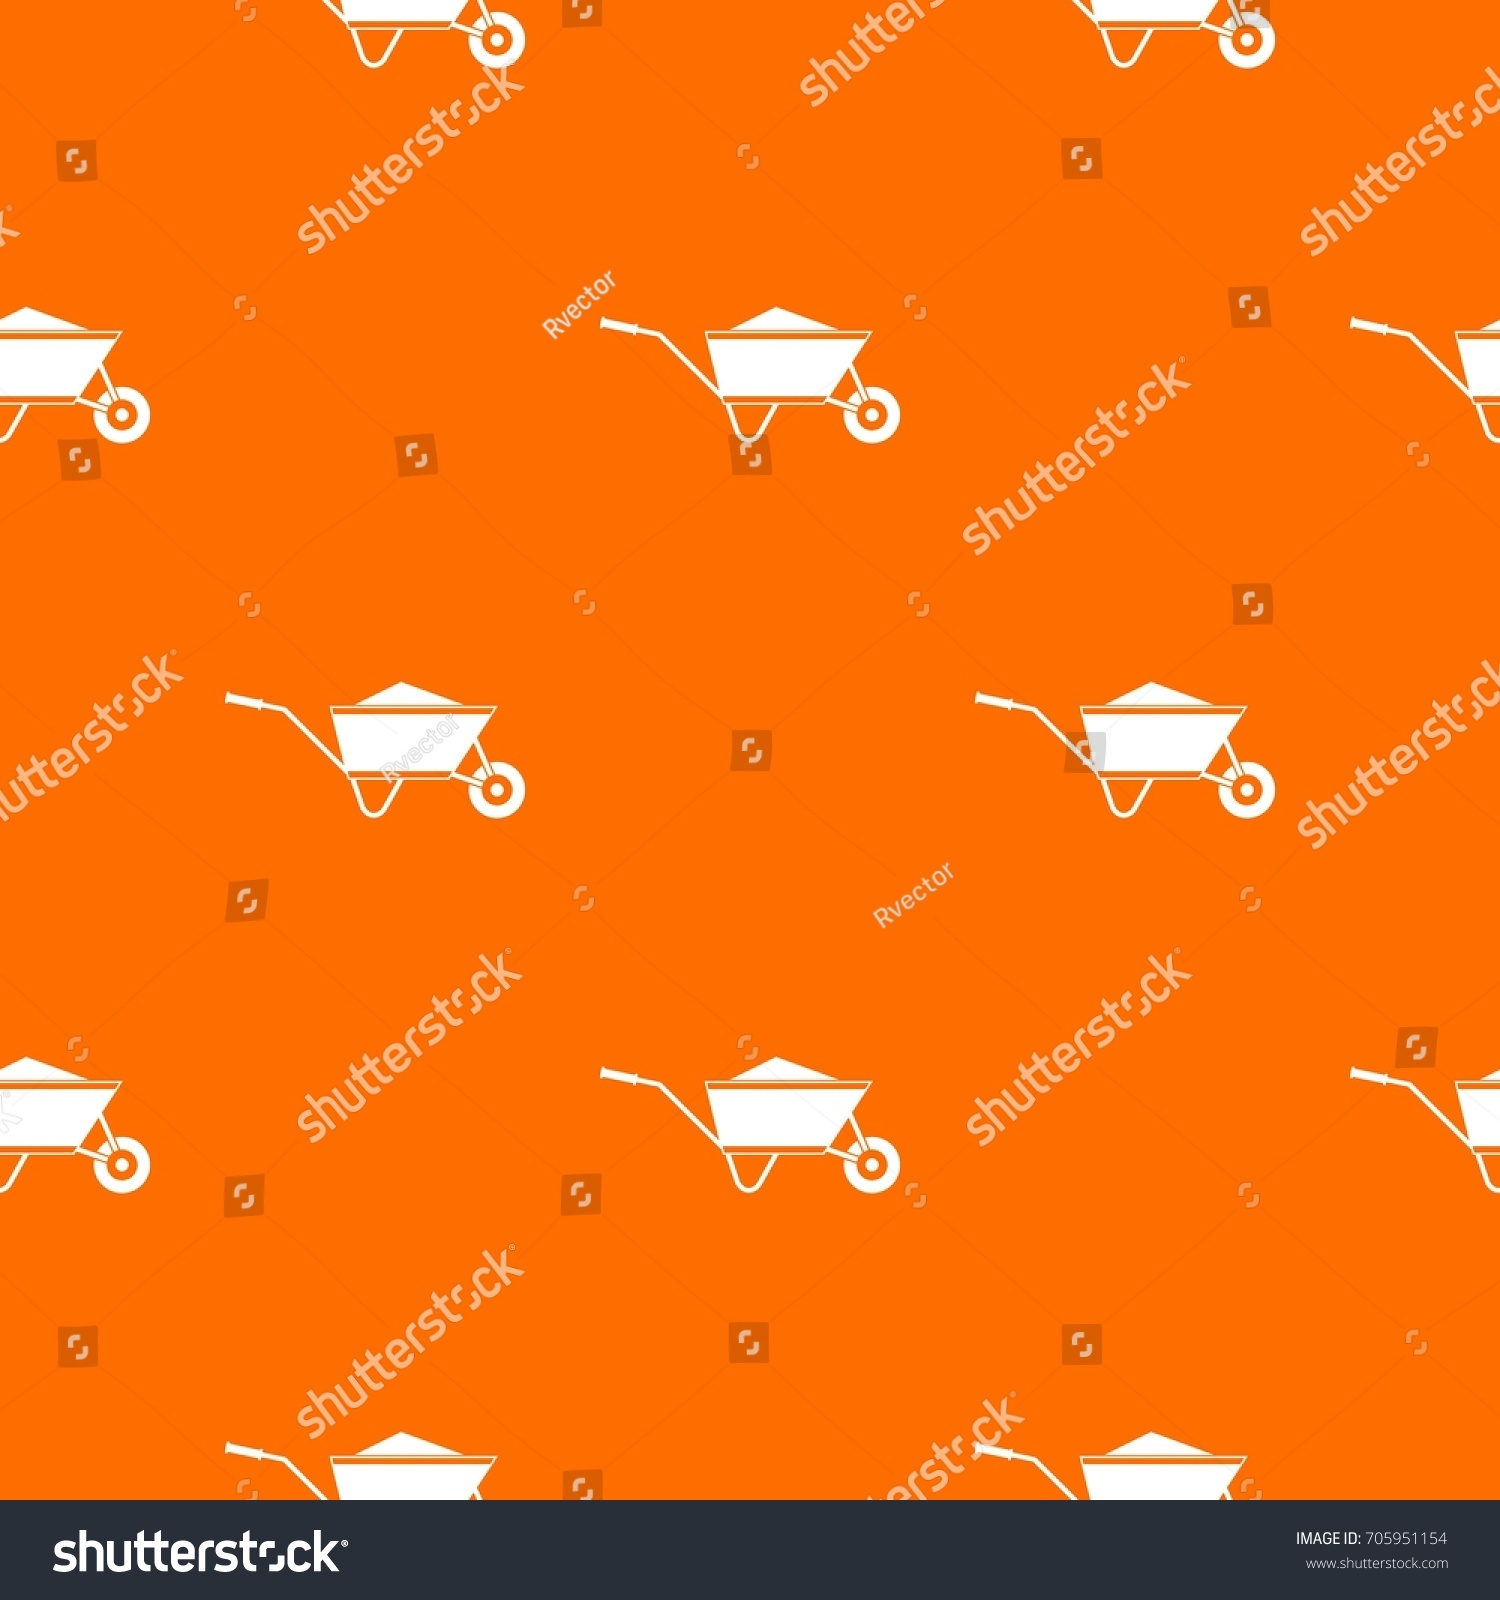 SVG of Wheelbarrow with sand pattern repeat seamless in orange color for any design. Vector geometric illustration svg